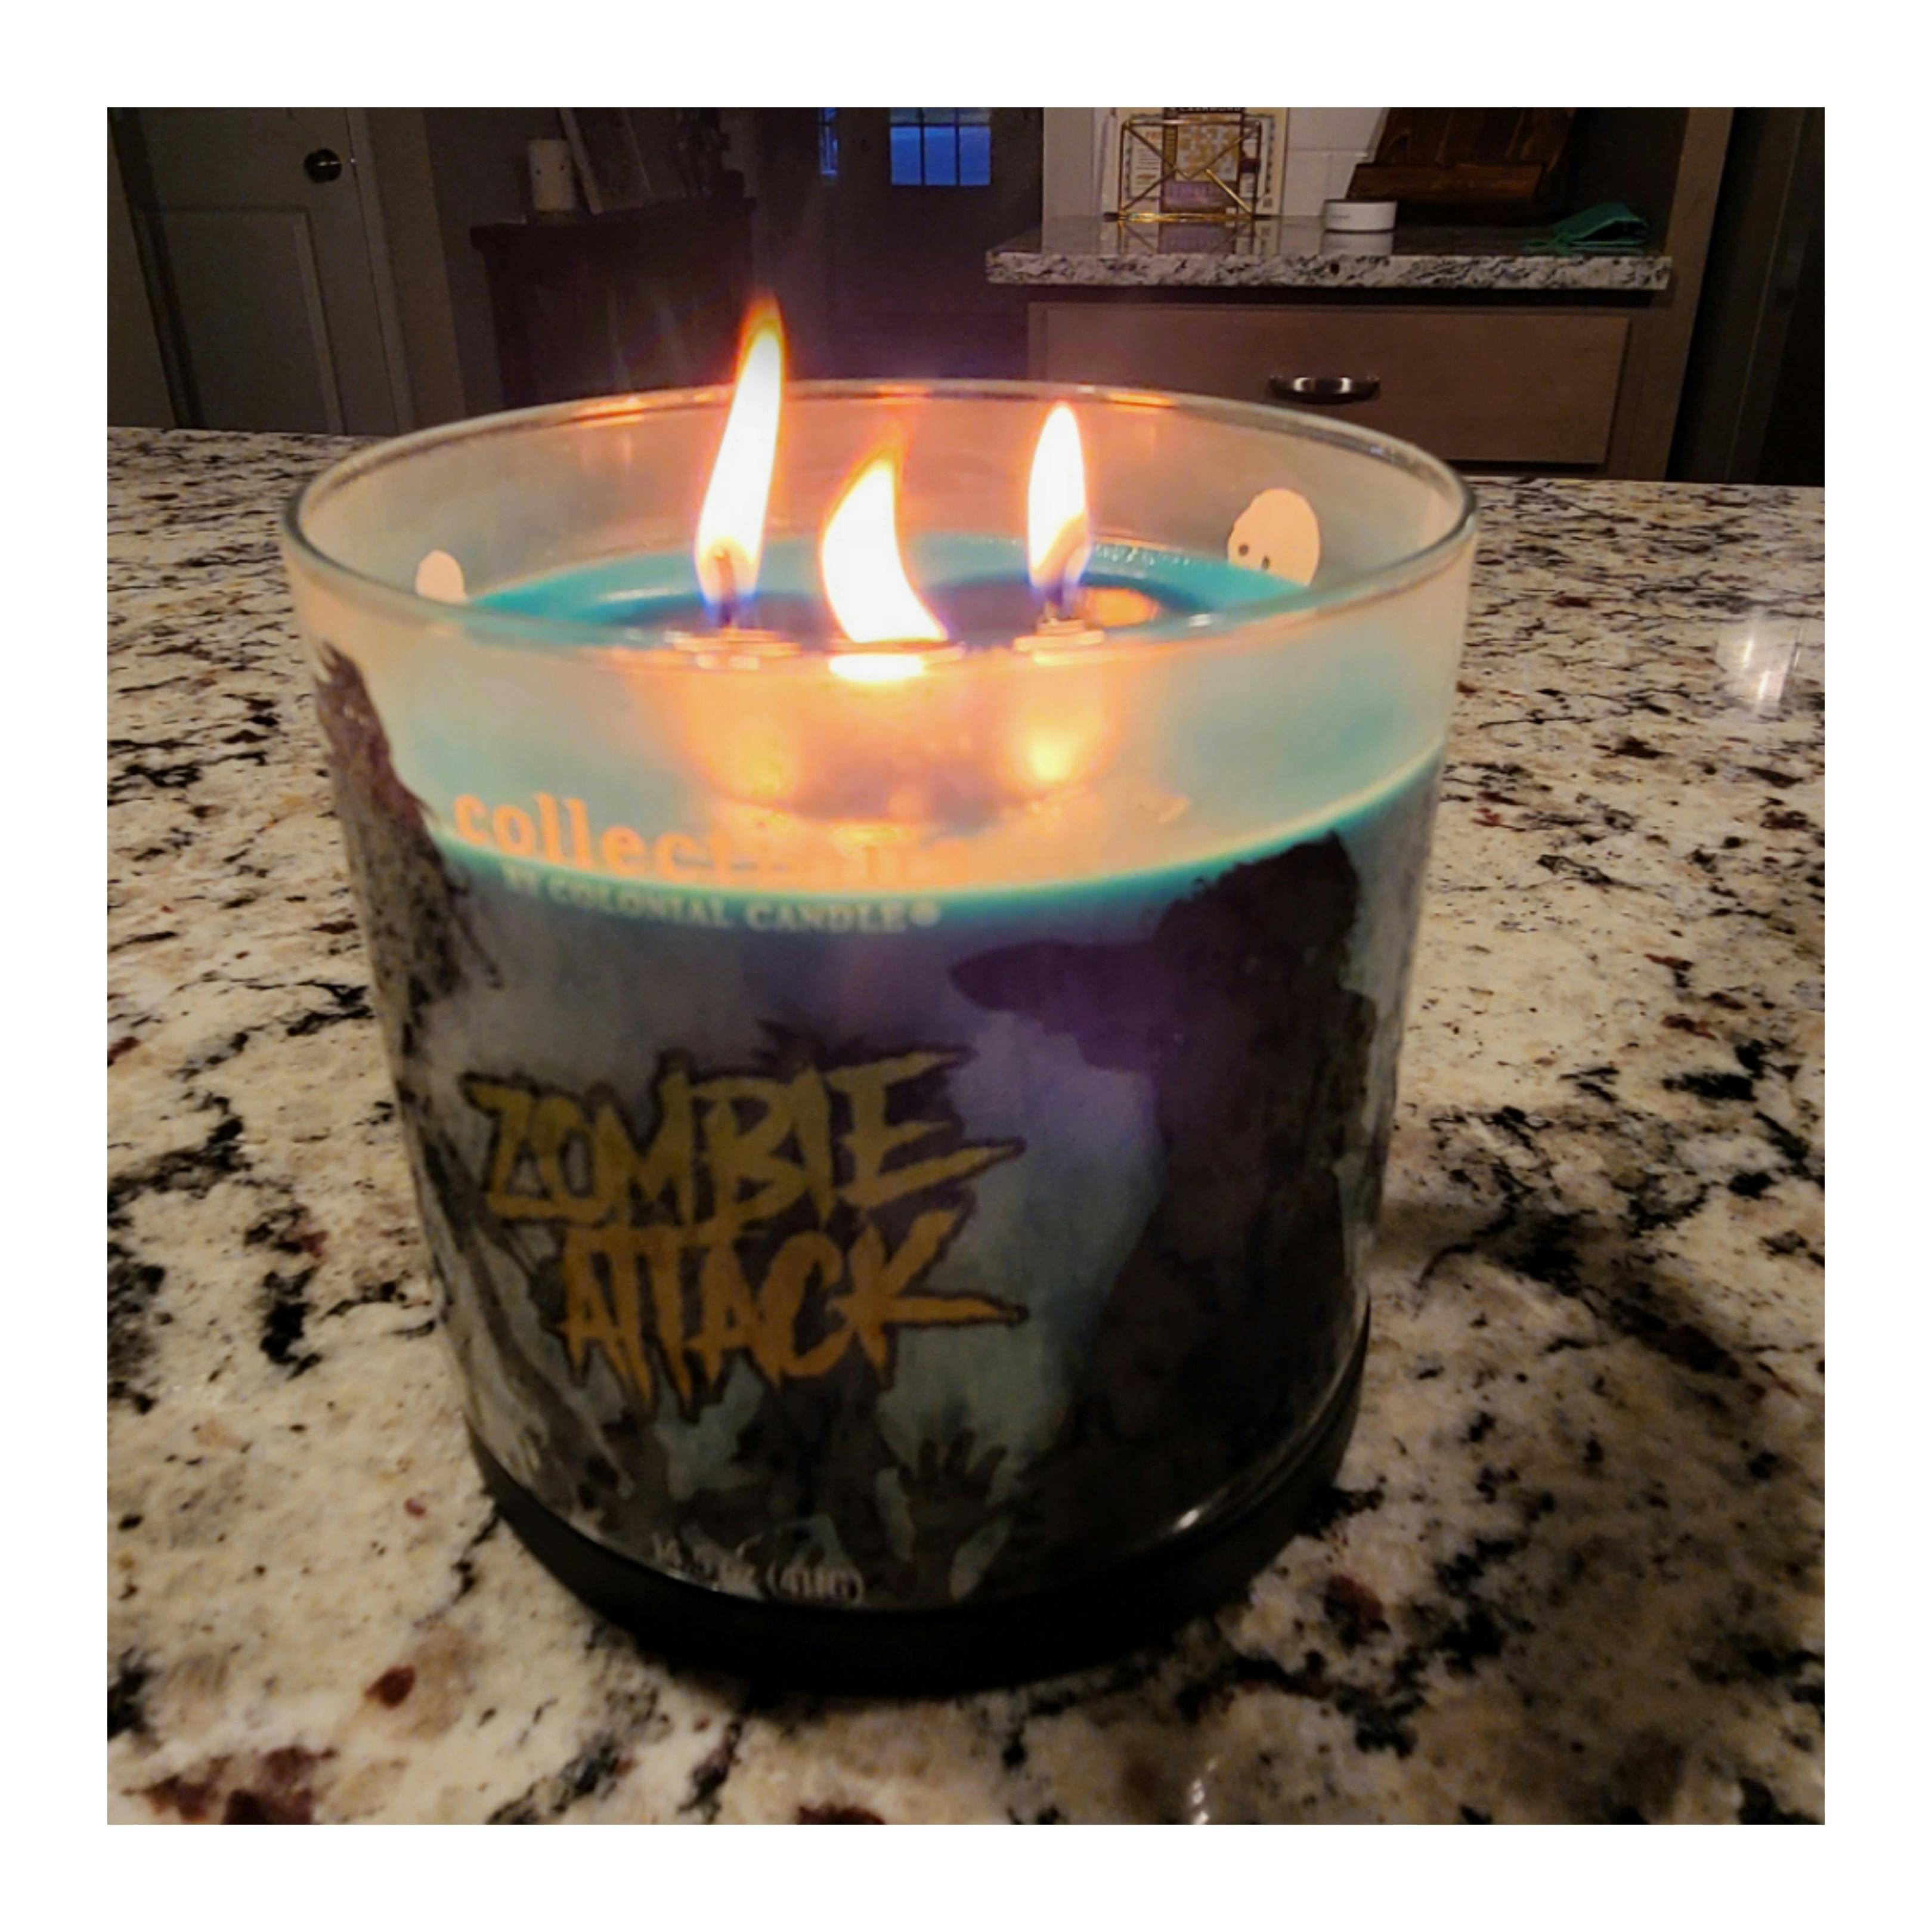 Smelly Jelly Jar – The Candle Box